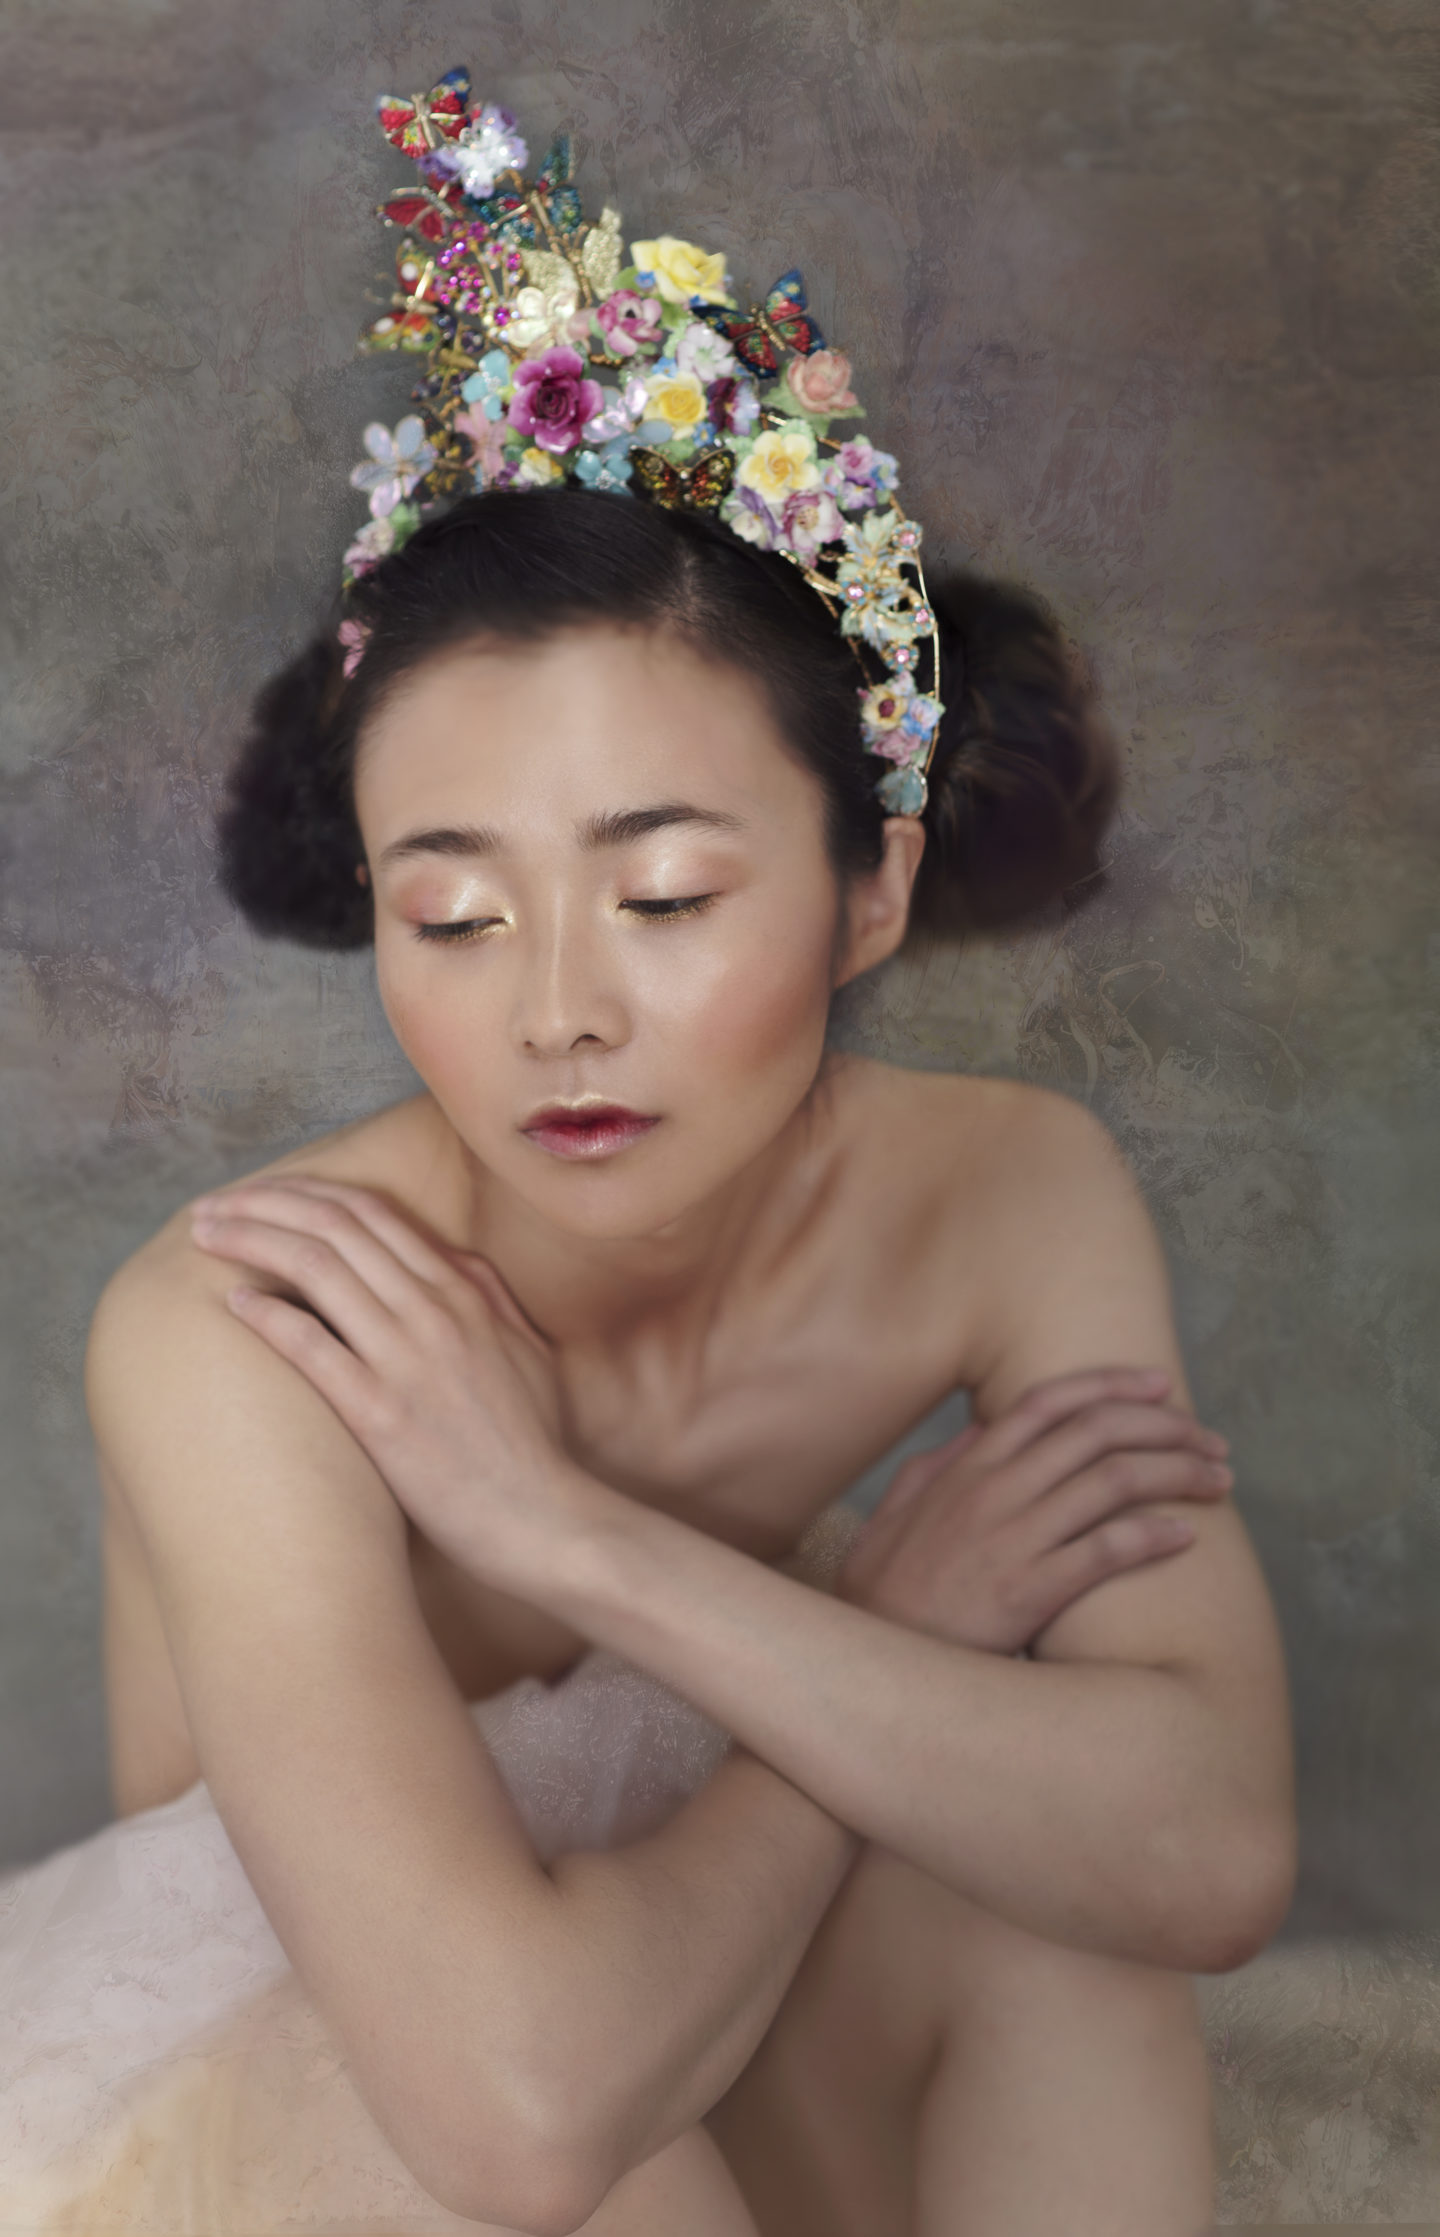 Re-cycled Floral Bridal Accessories For An Avant Garde Wedding Look